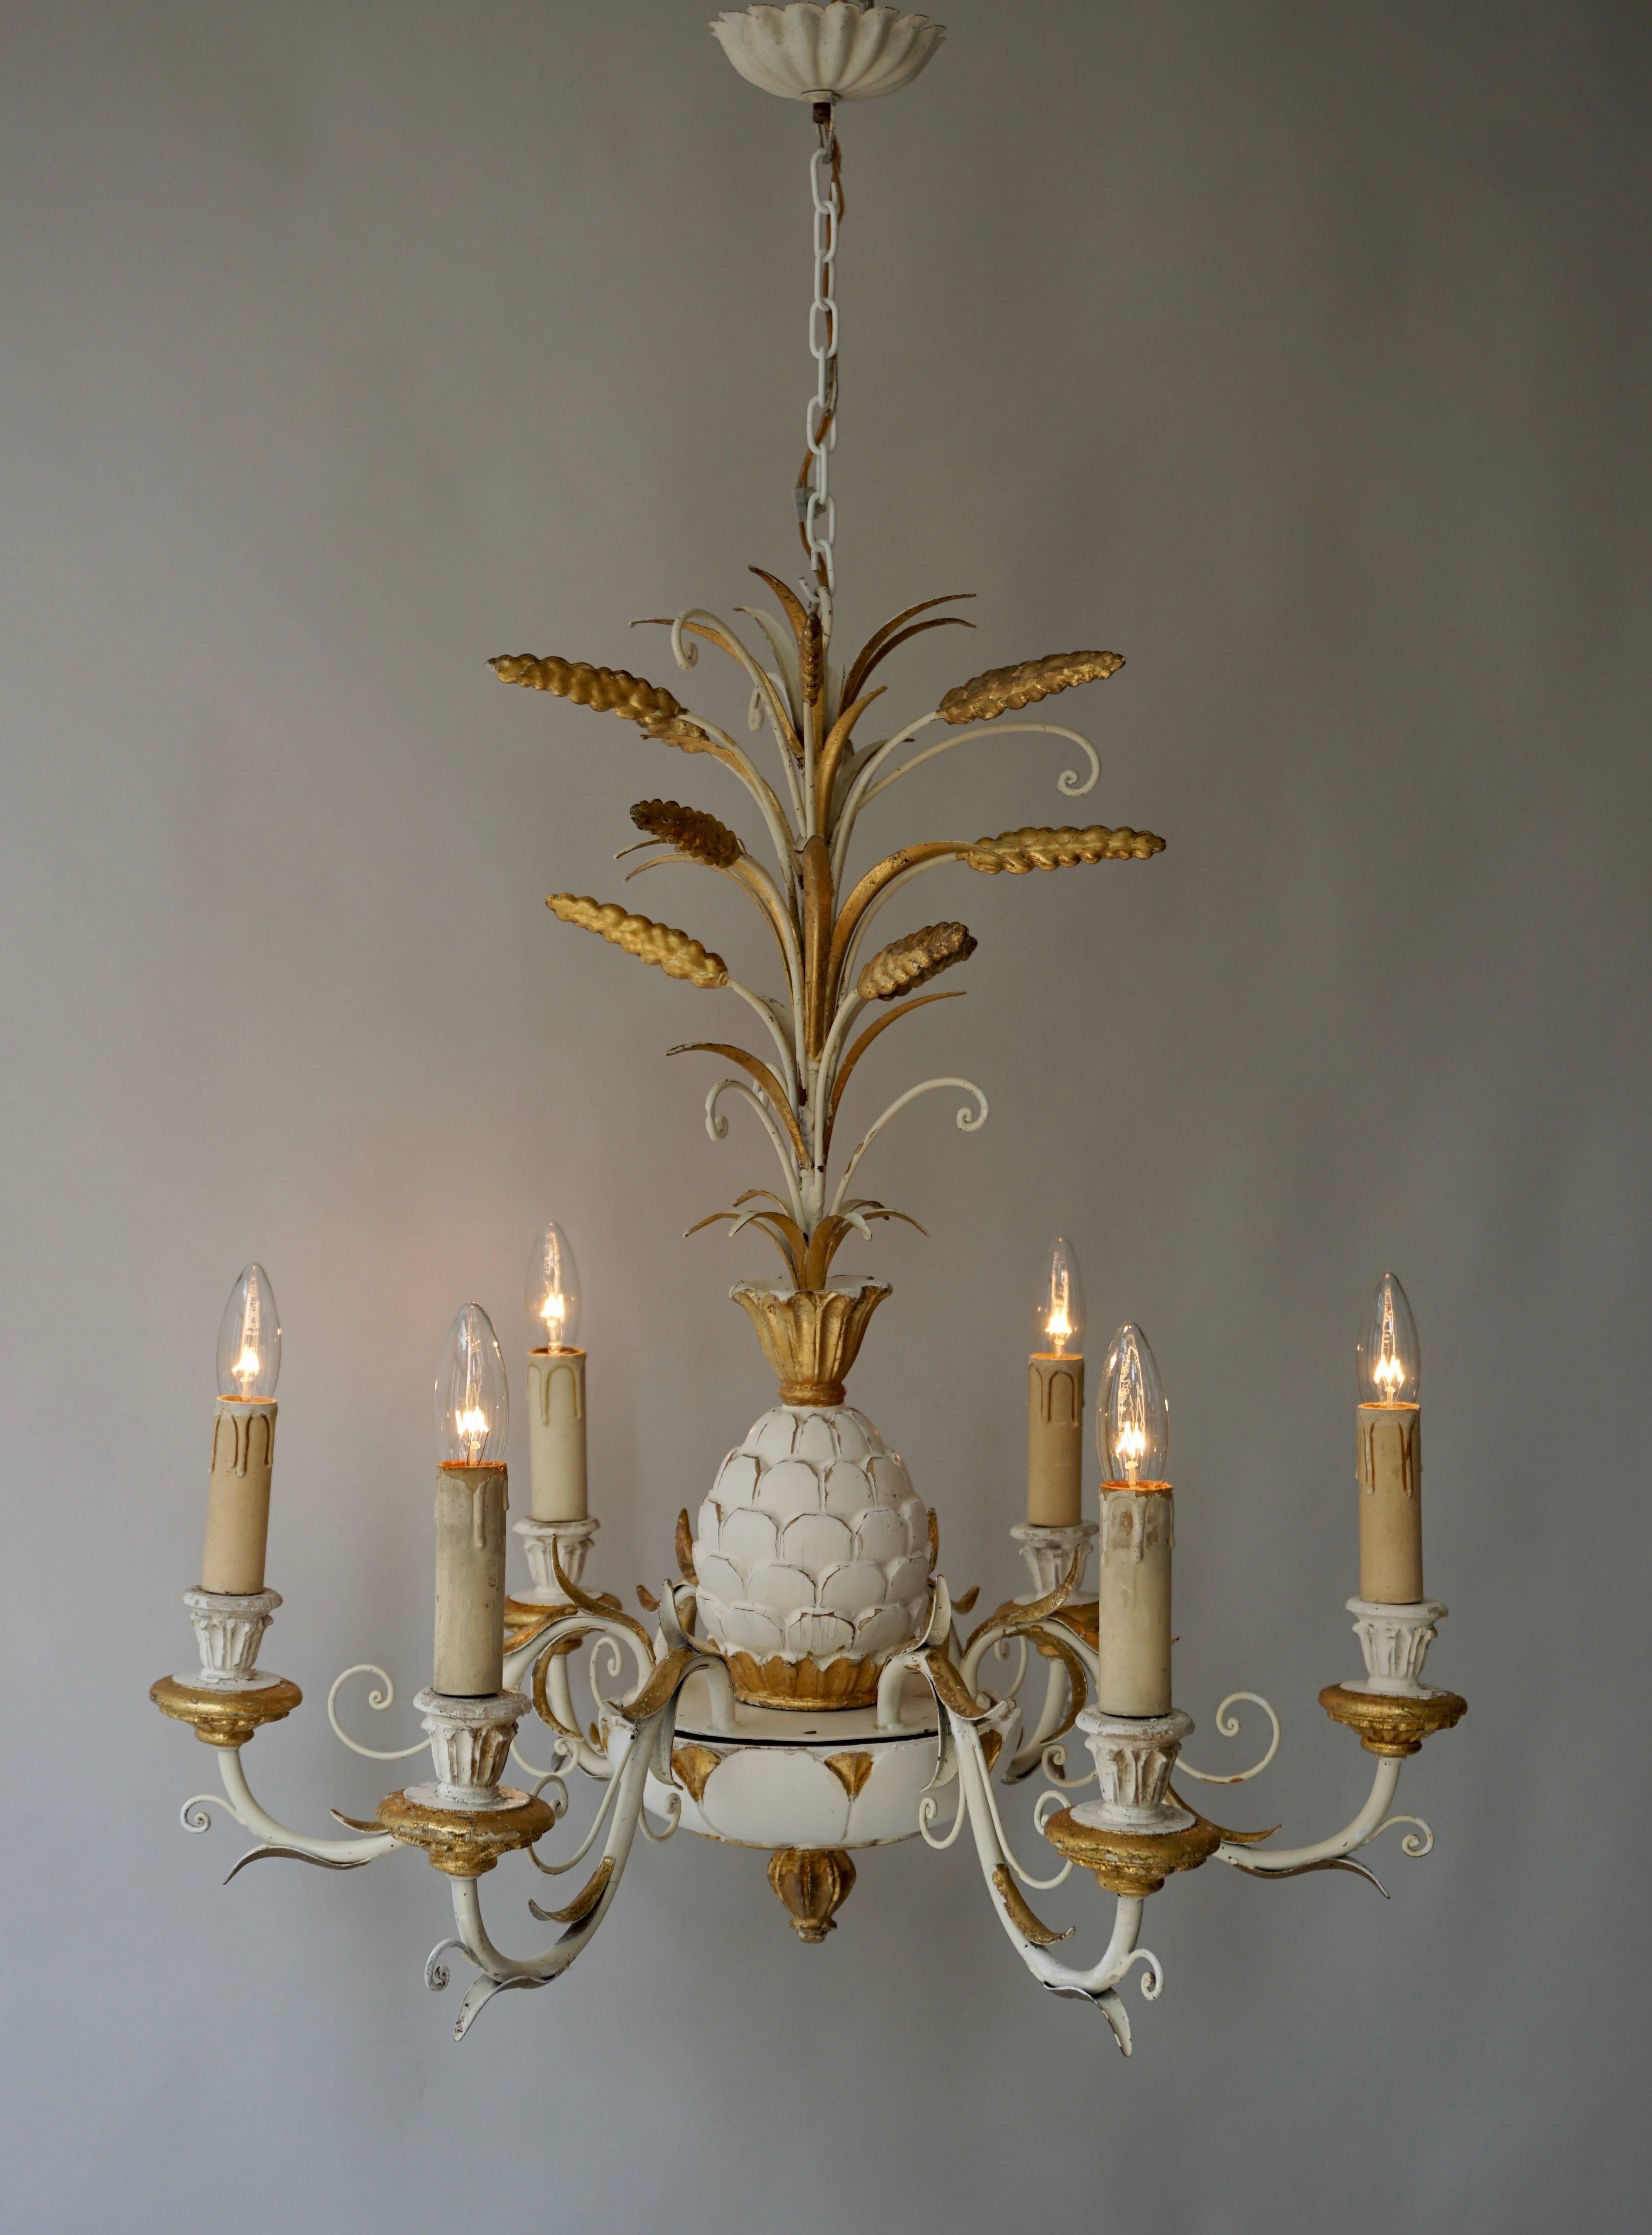 20th Century 1950s Carved Giltwood Italian Gold and White Pineapple Chandelier